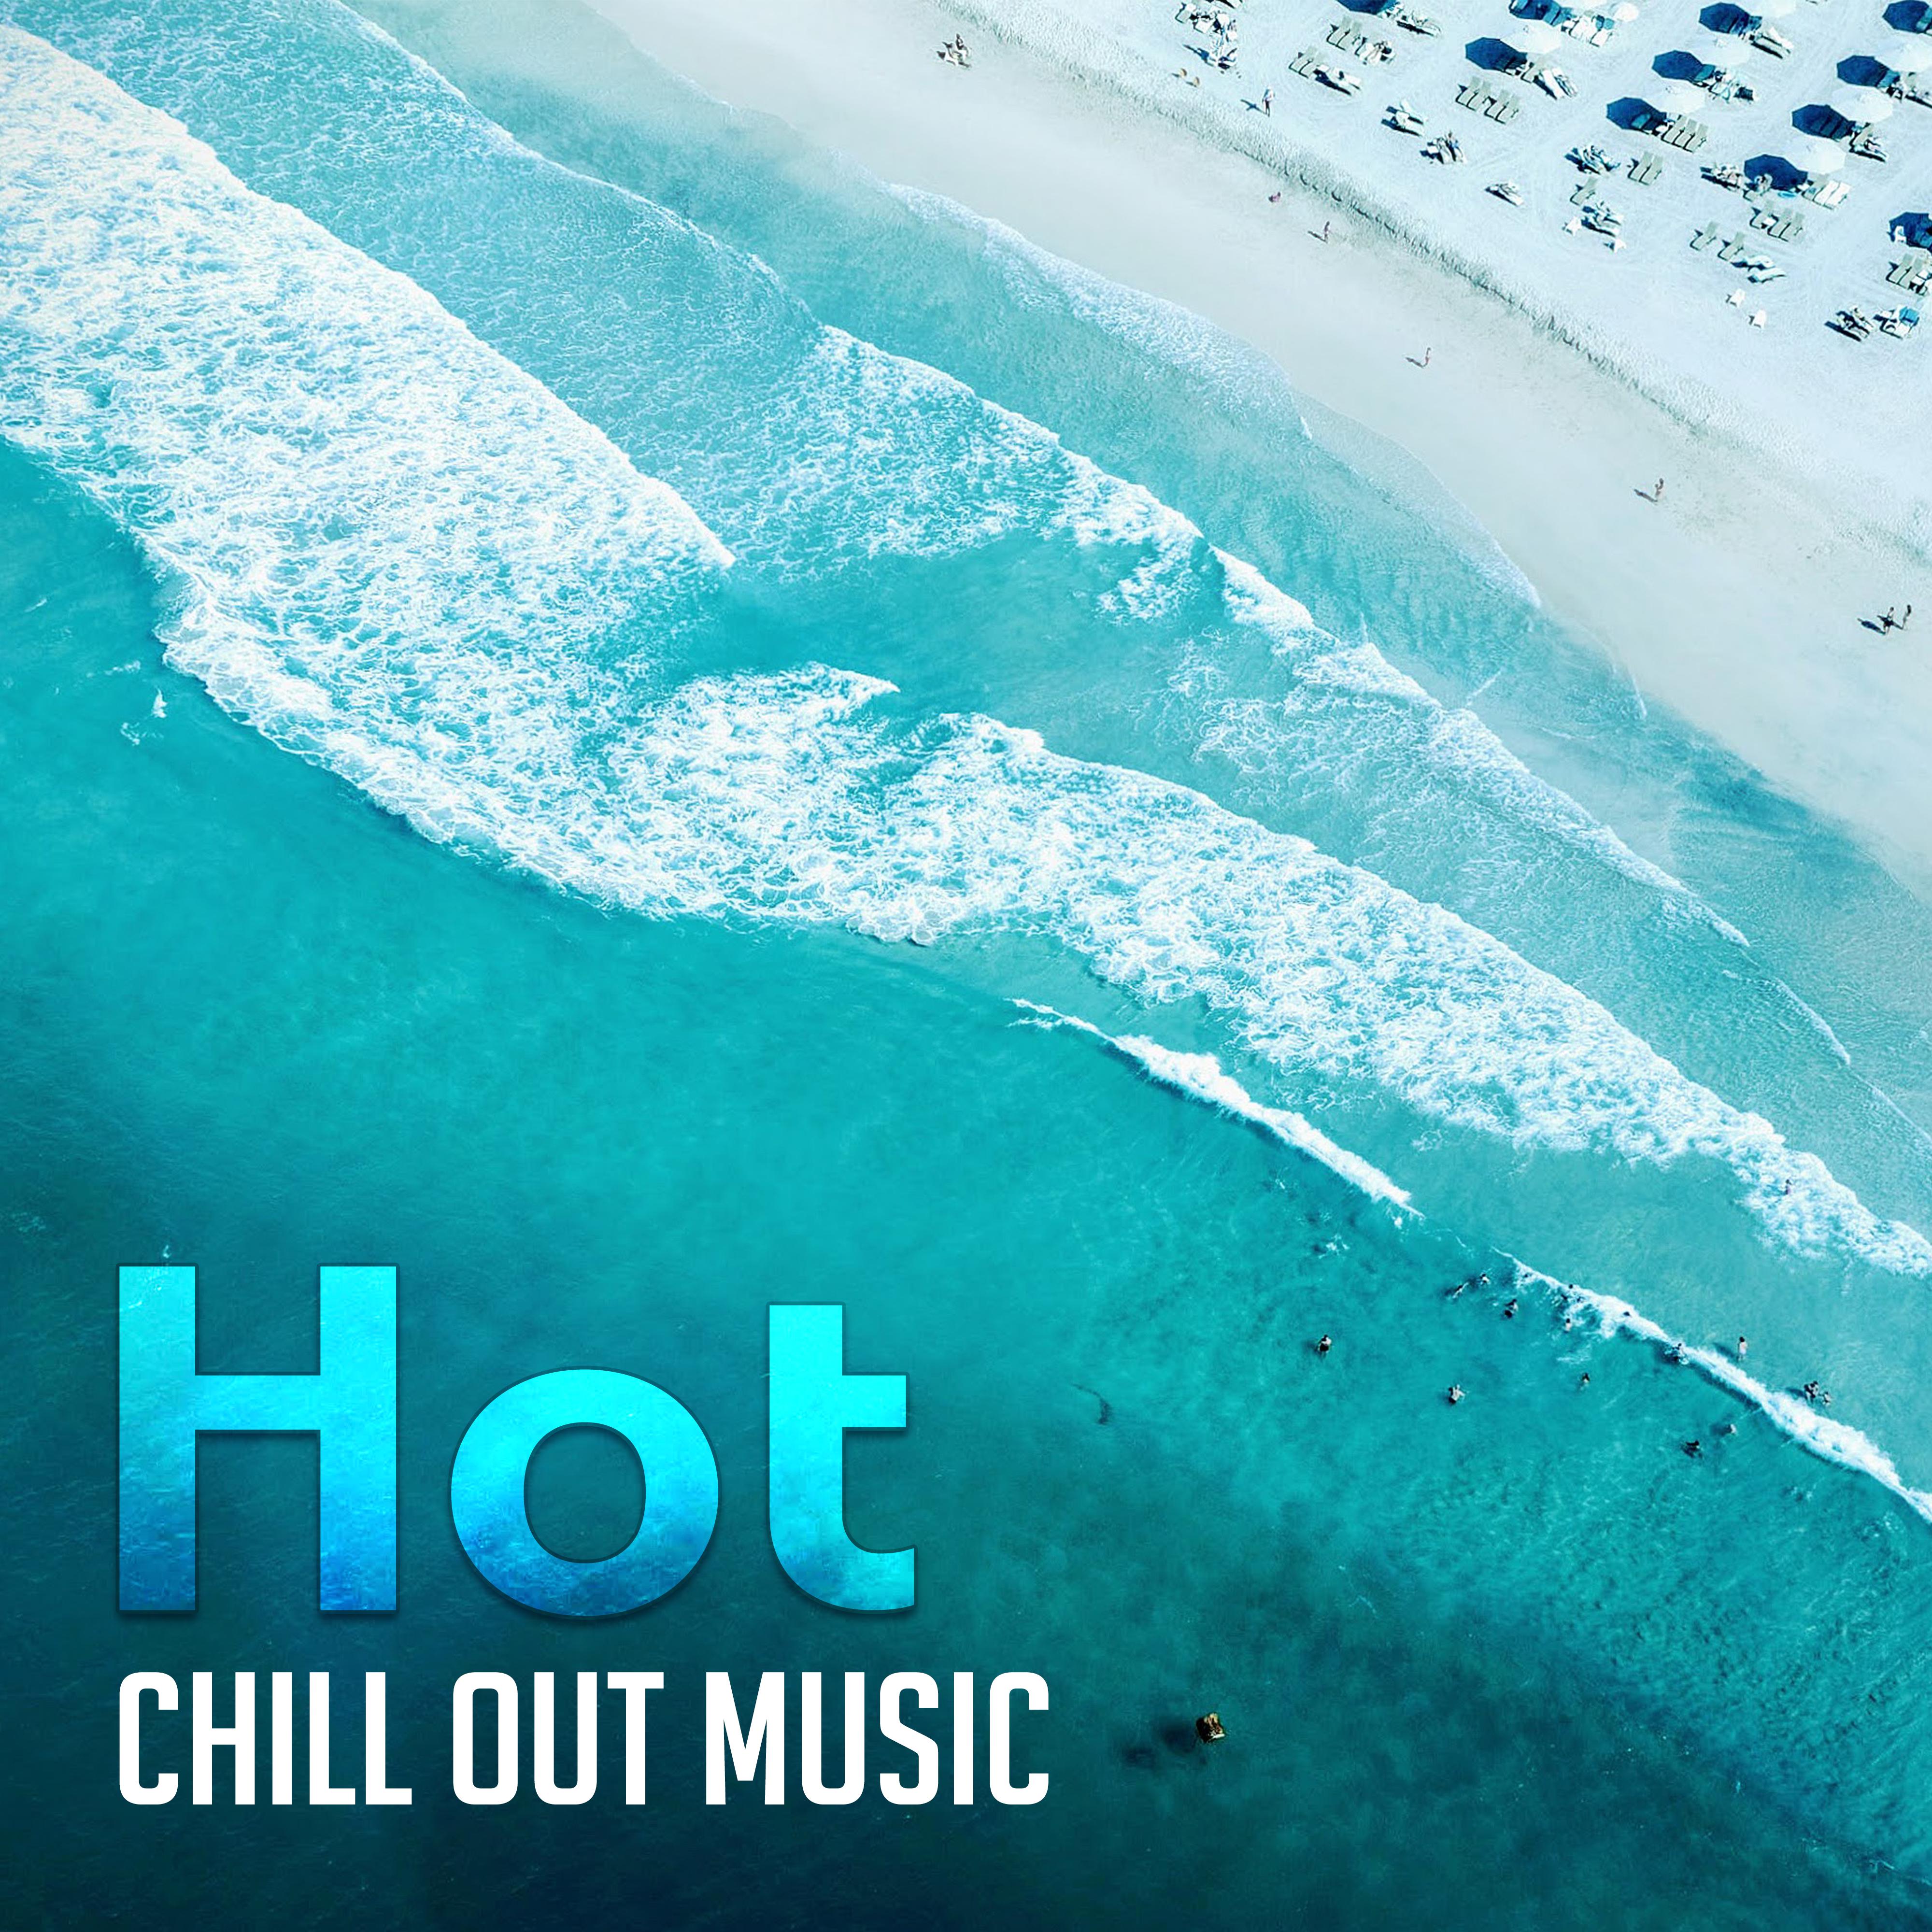 Hot Chill Out Music  Relaxation, Sensual Dance,  Music 69, Ibiza Chill Out, Deep Vibes, Beach Chill,  on the Beach